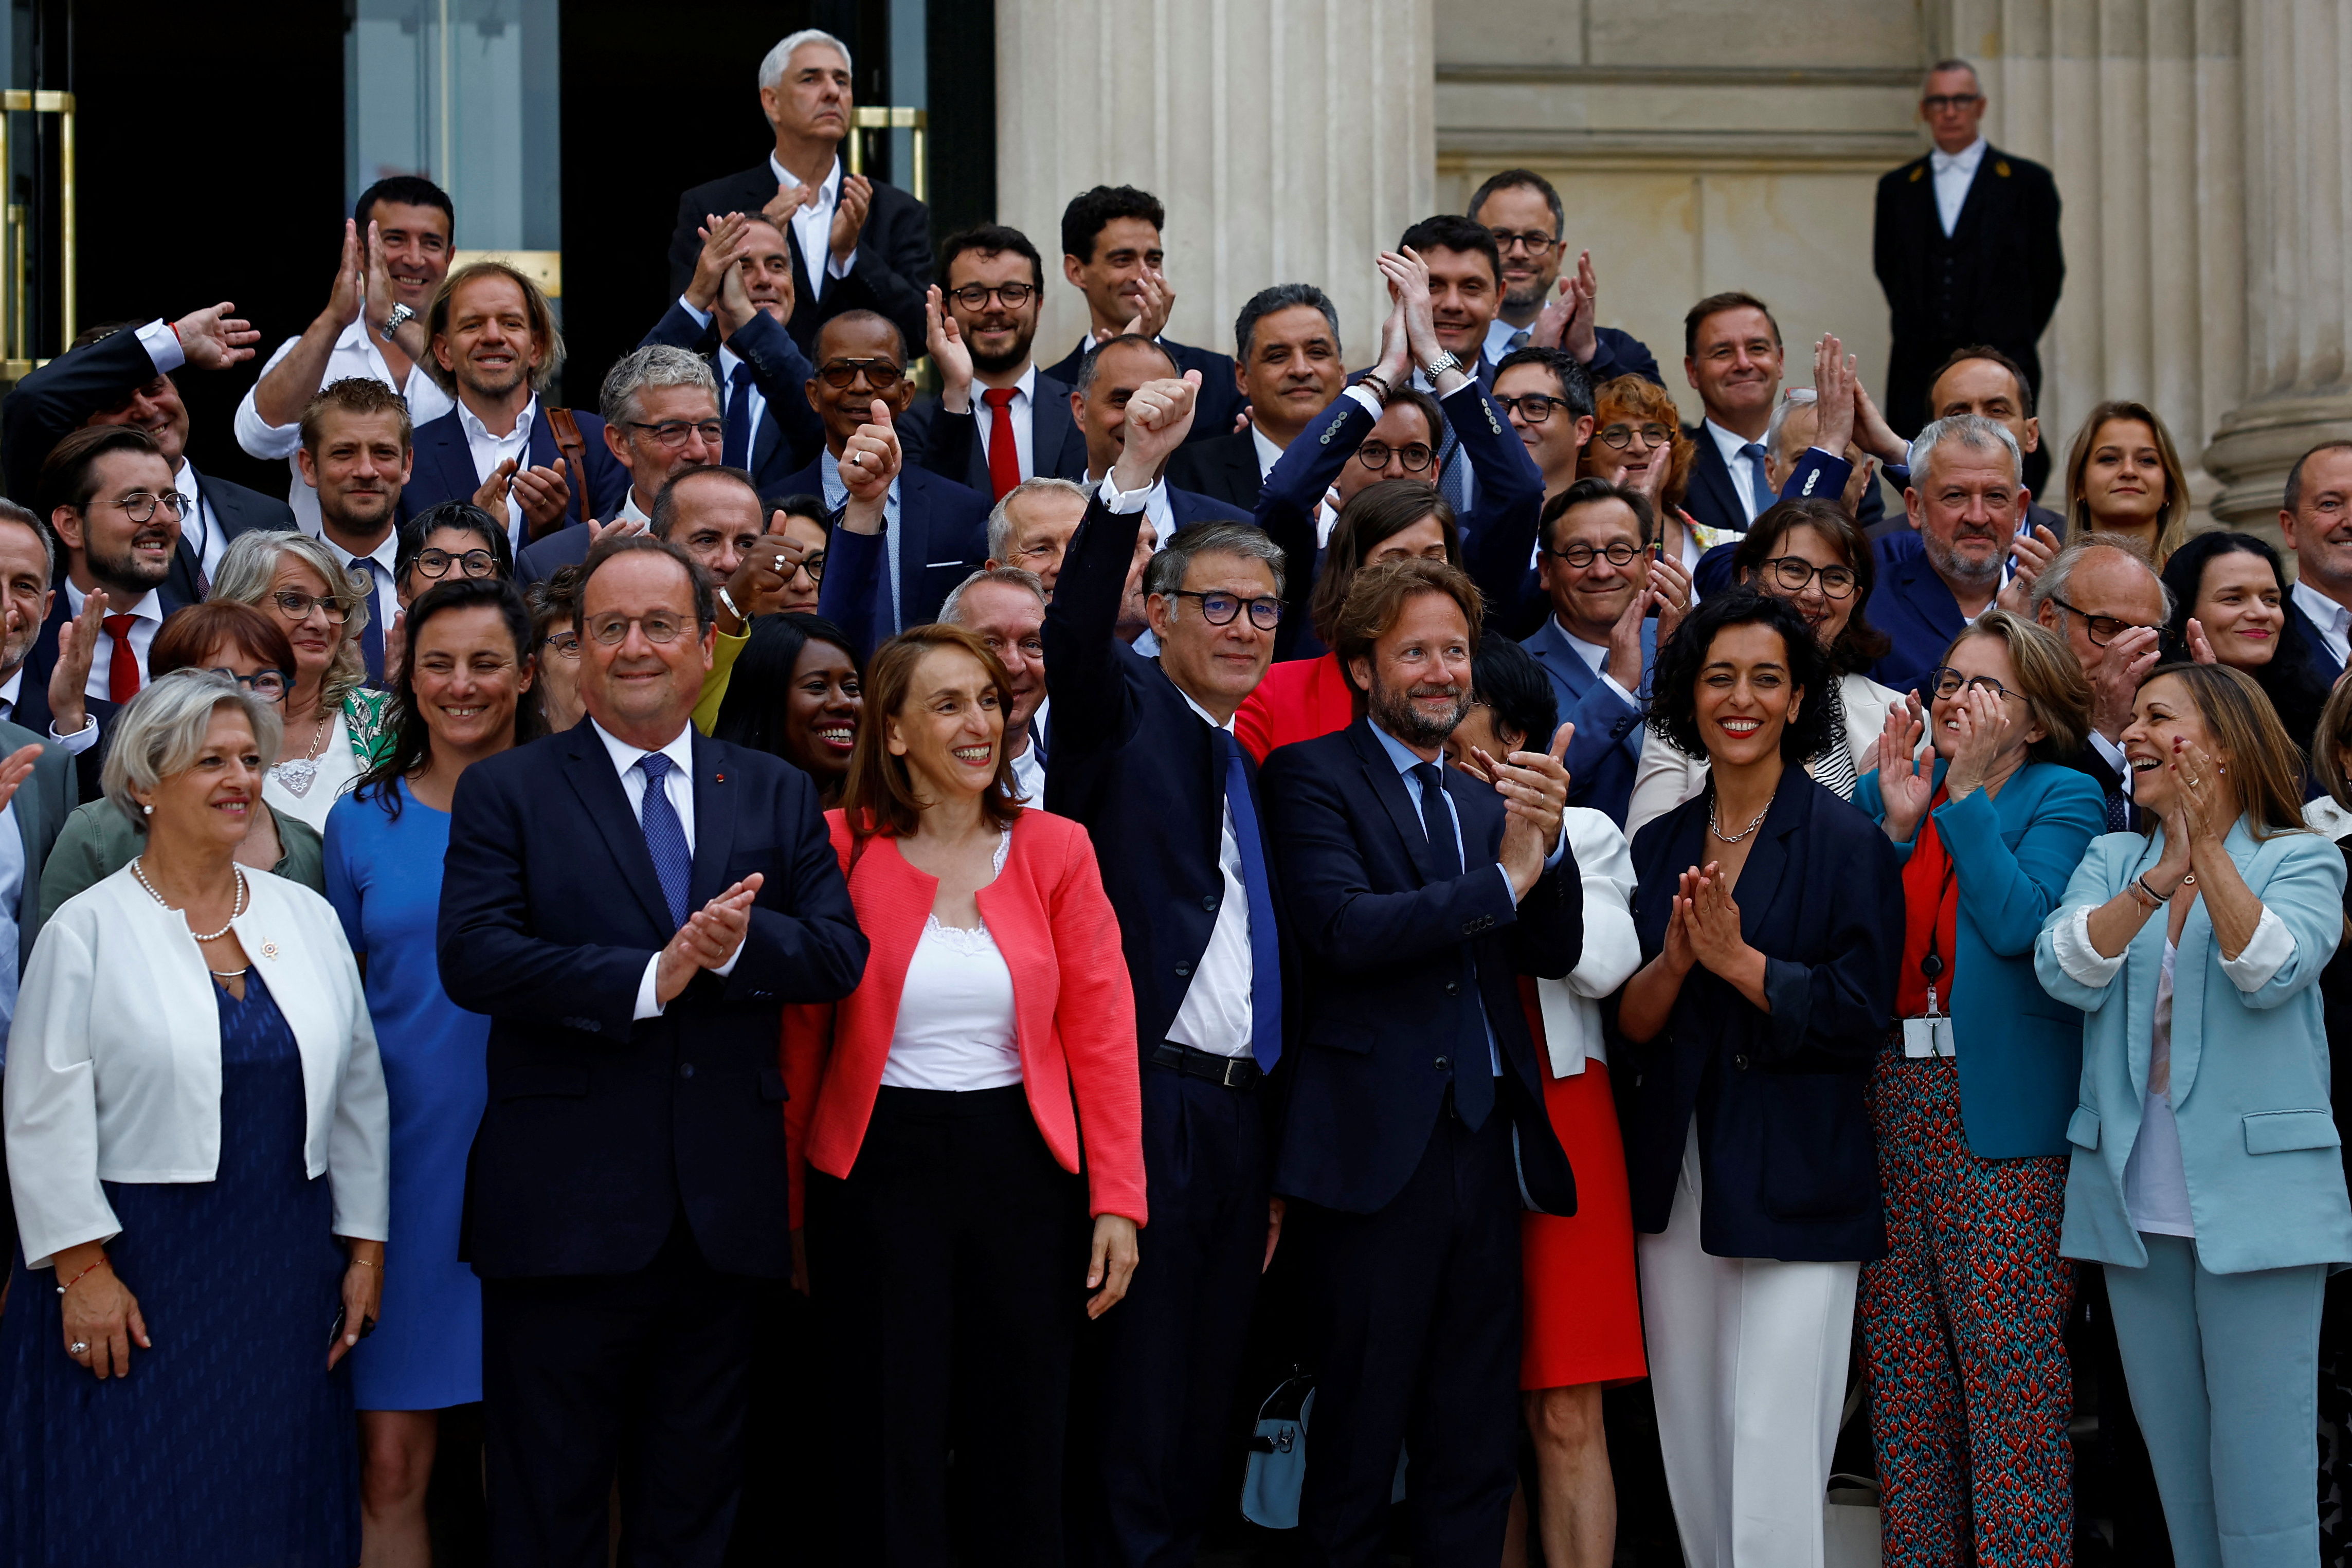 Newly-elected lawmakers make entry to the National Assembly in Paris